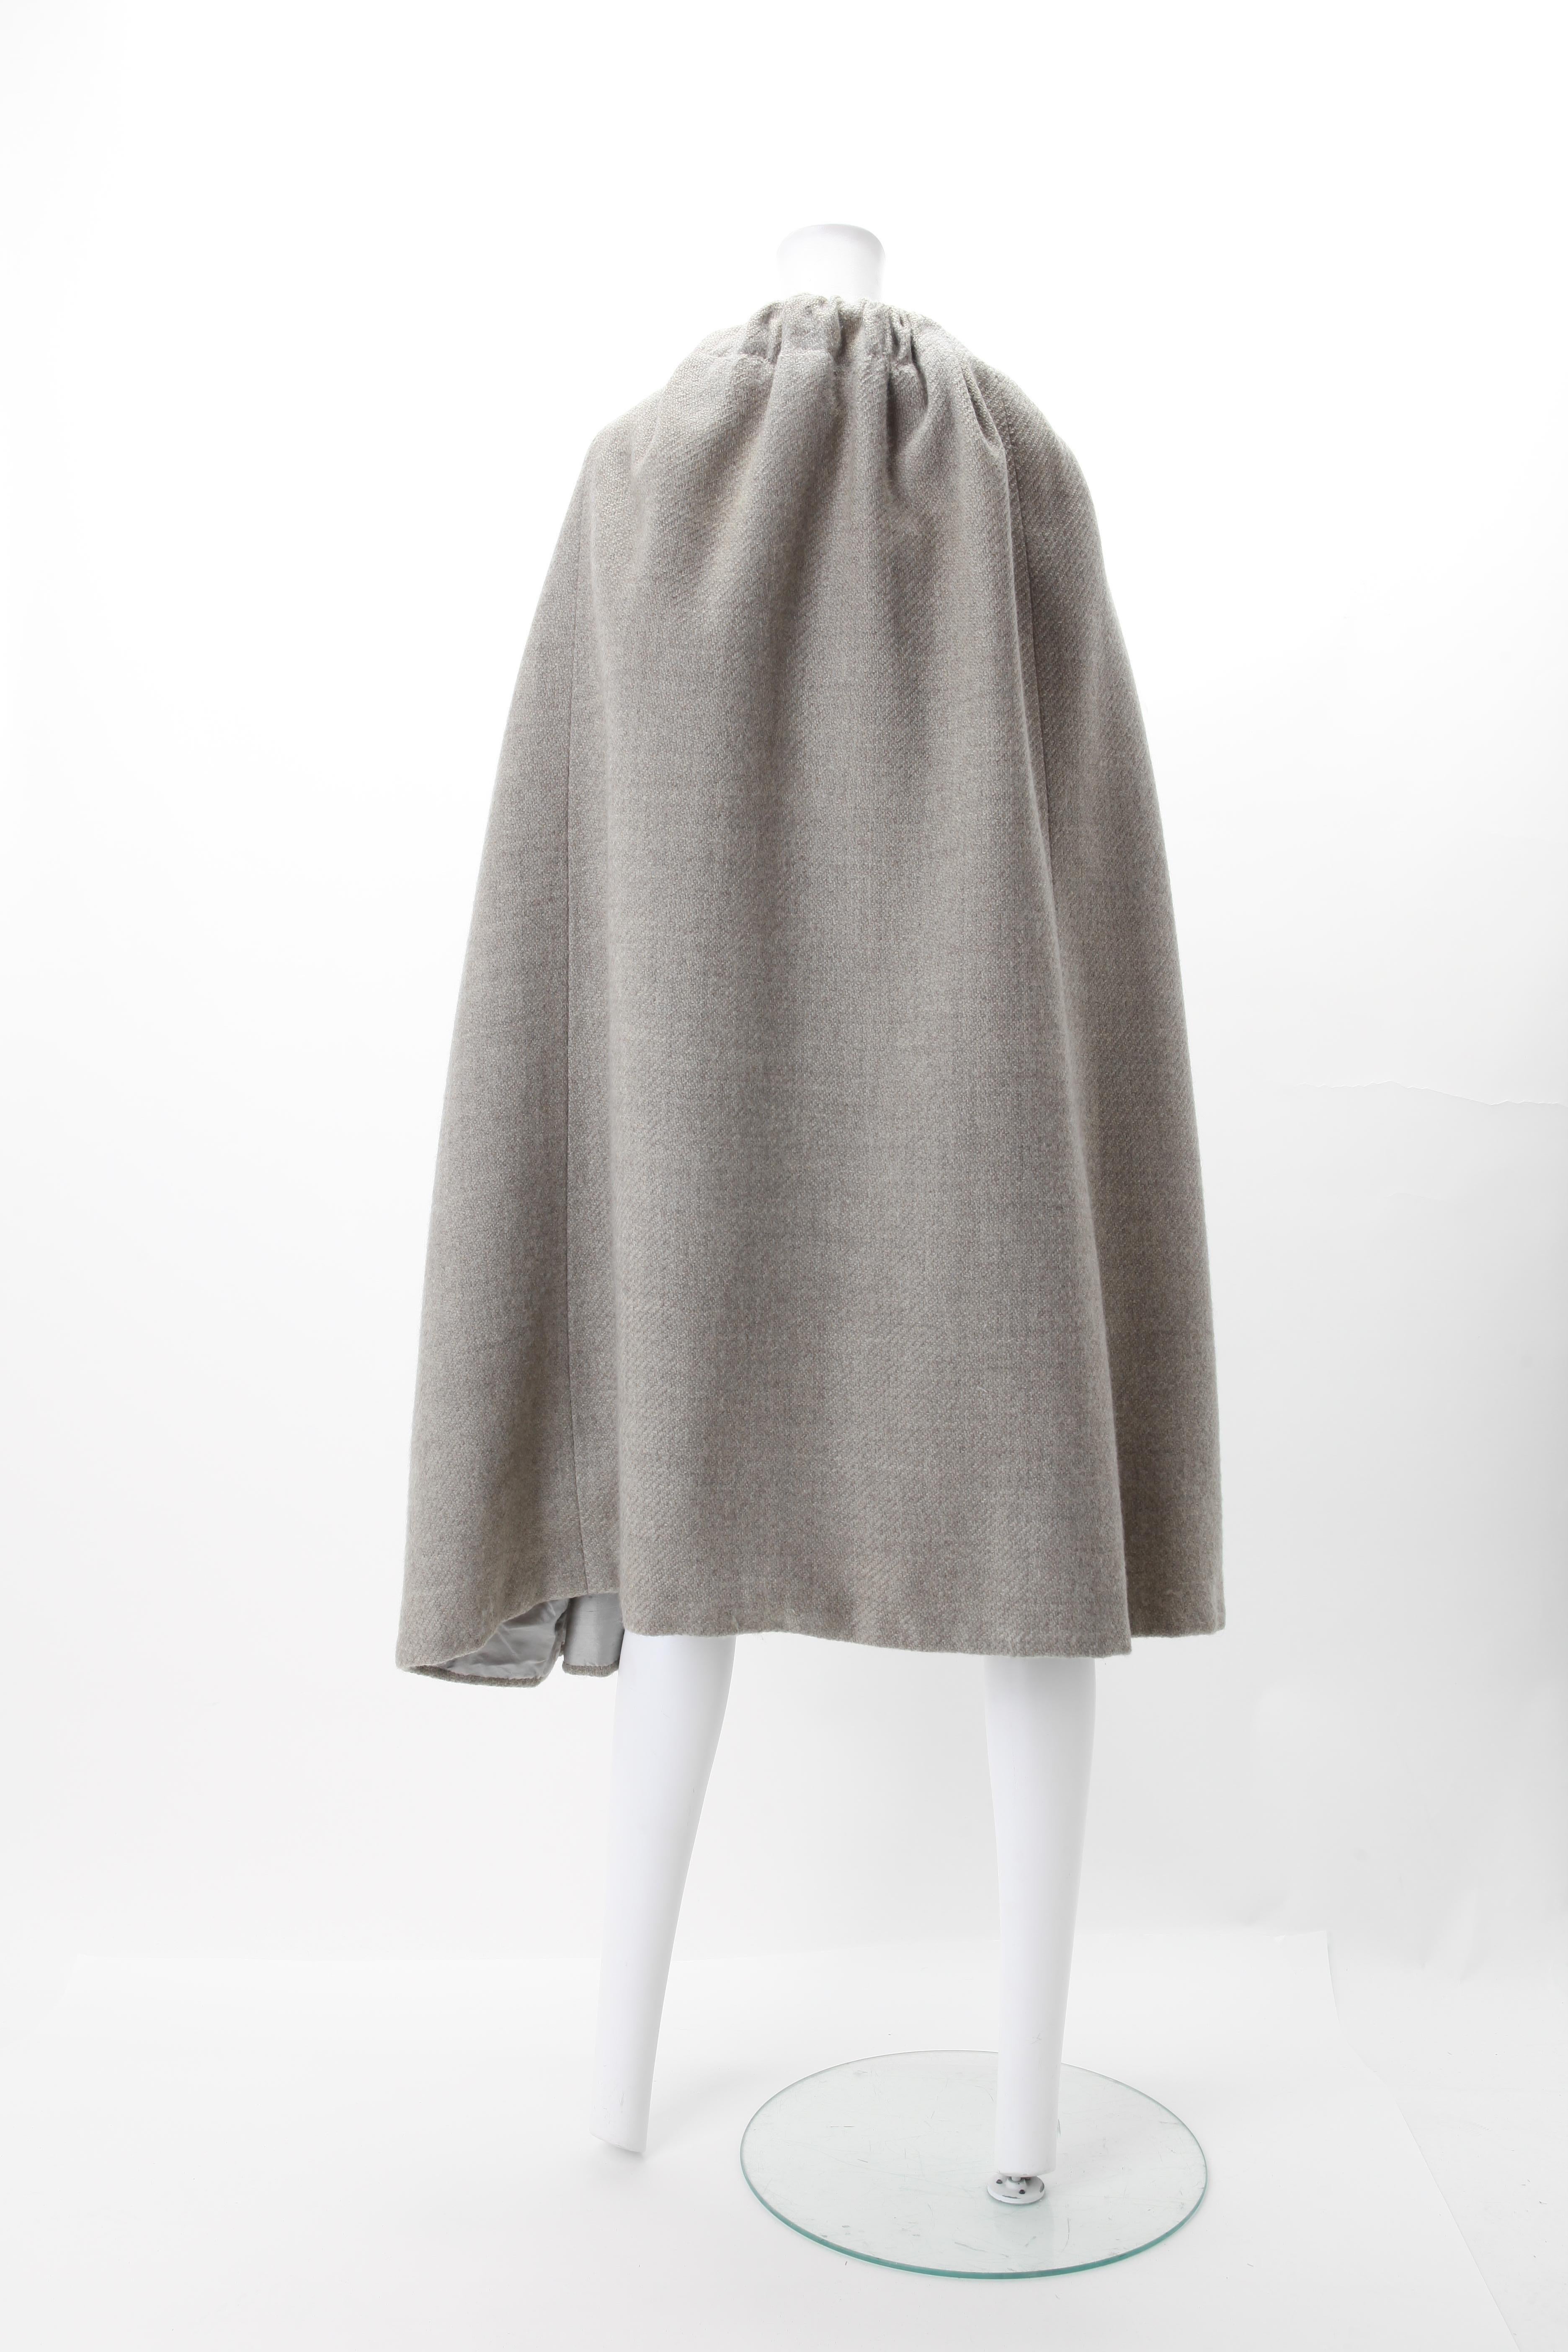 Balenciaga Couture Wool Knit Cape, c.1970s
1970s Numbered 